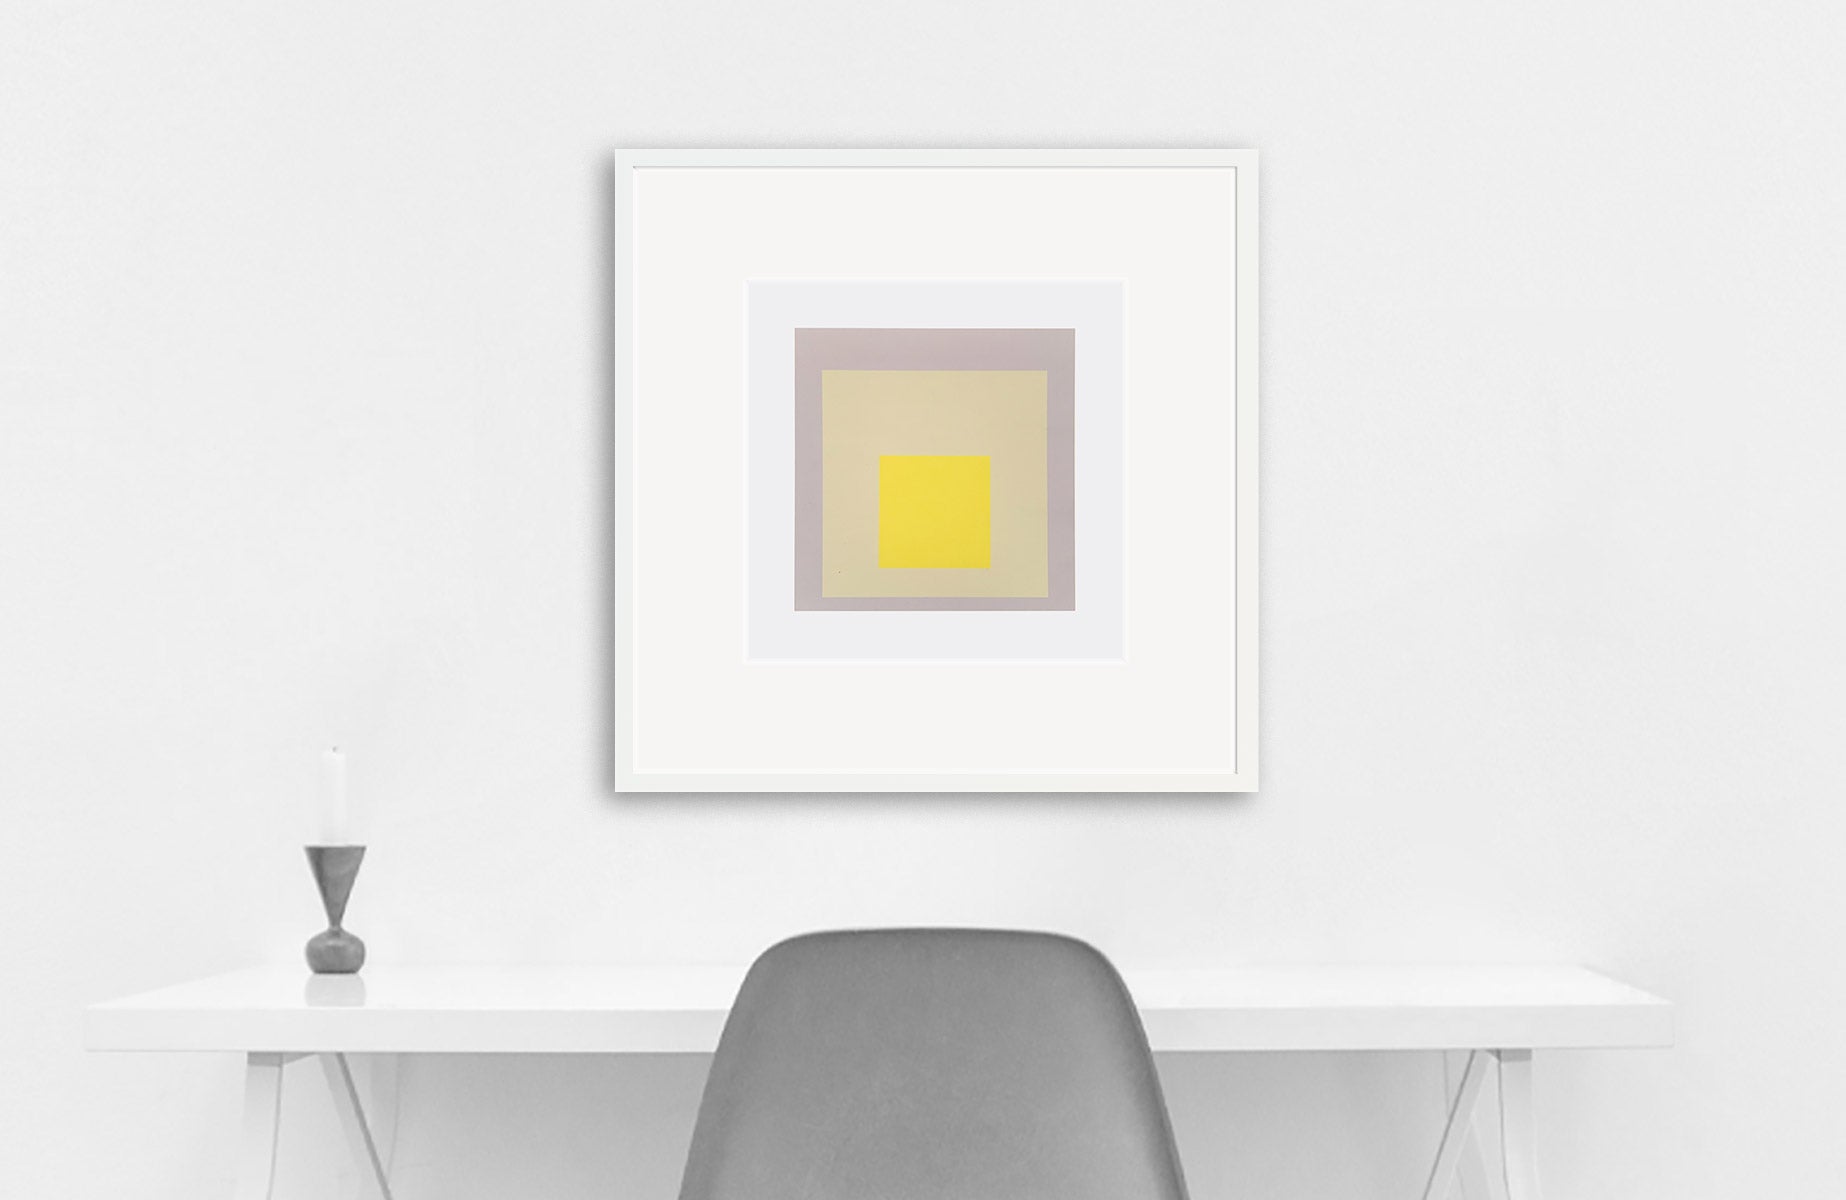 JOSEF ALBERS | Homage to the Square #3